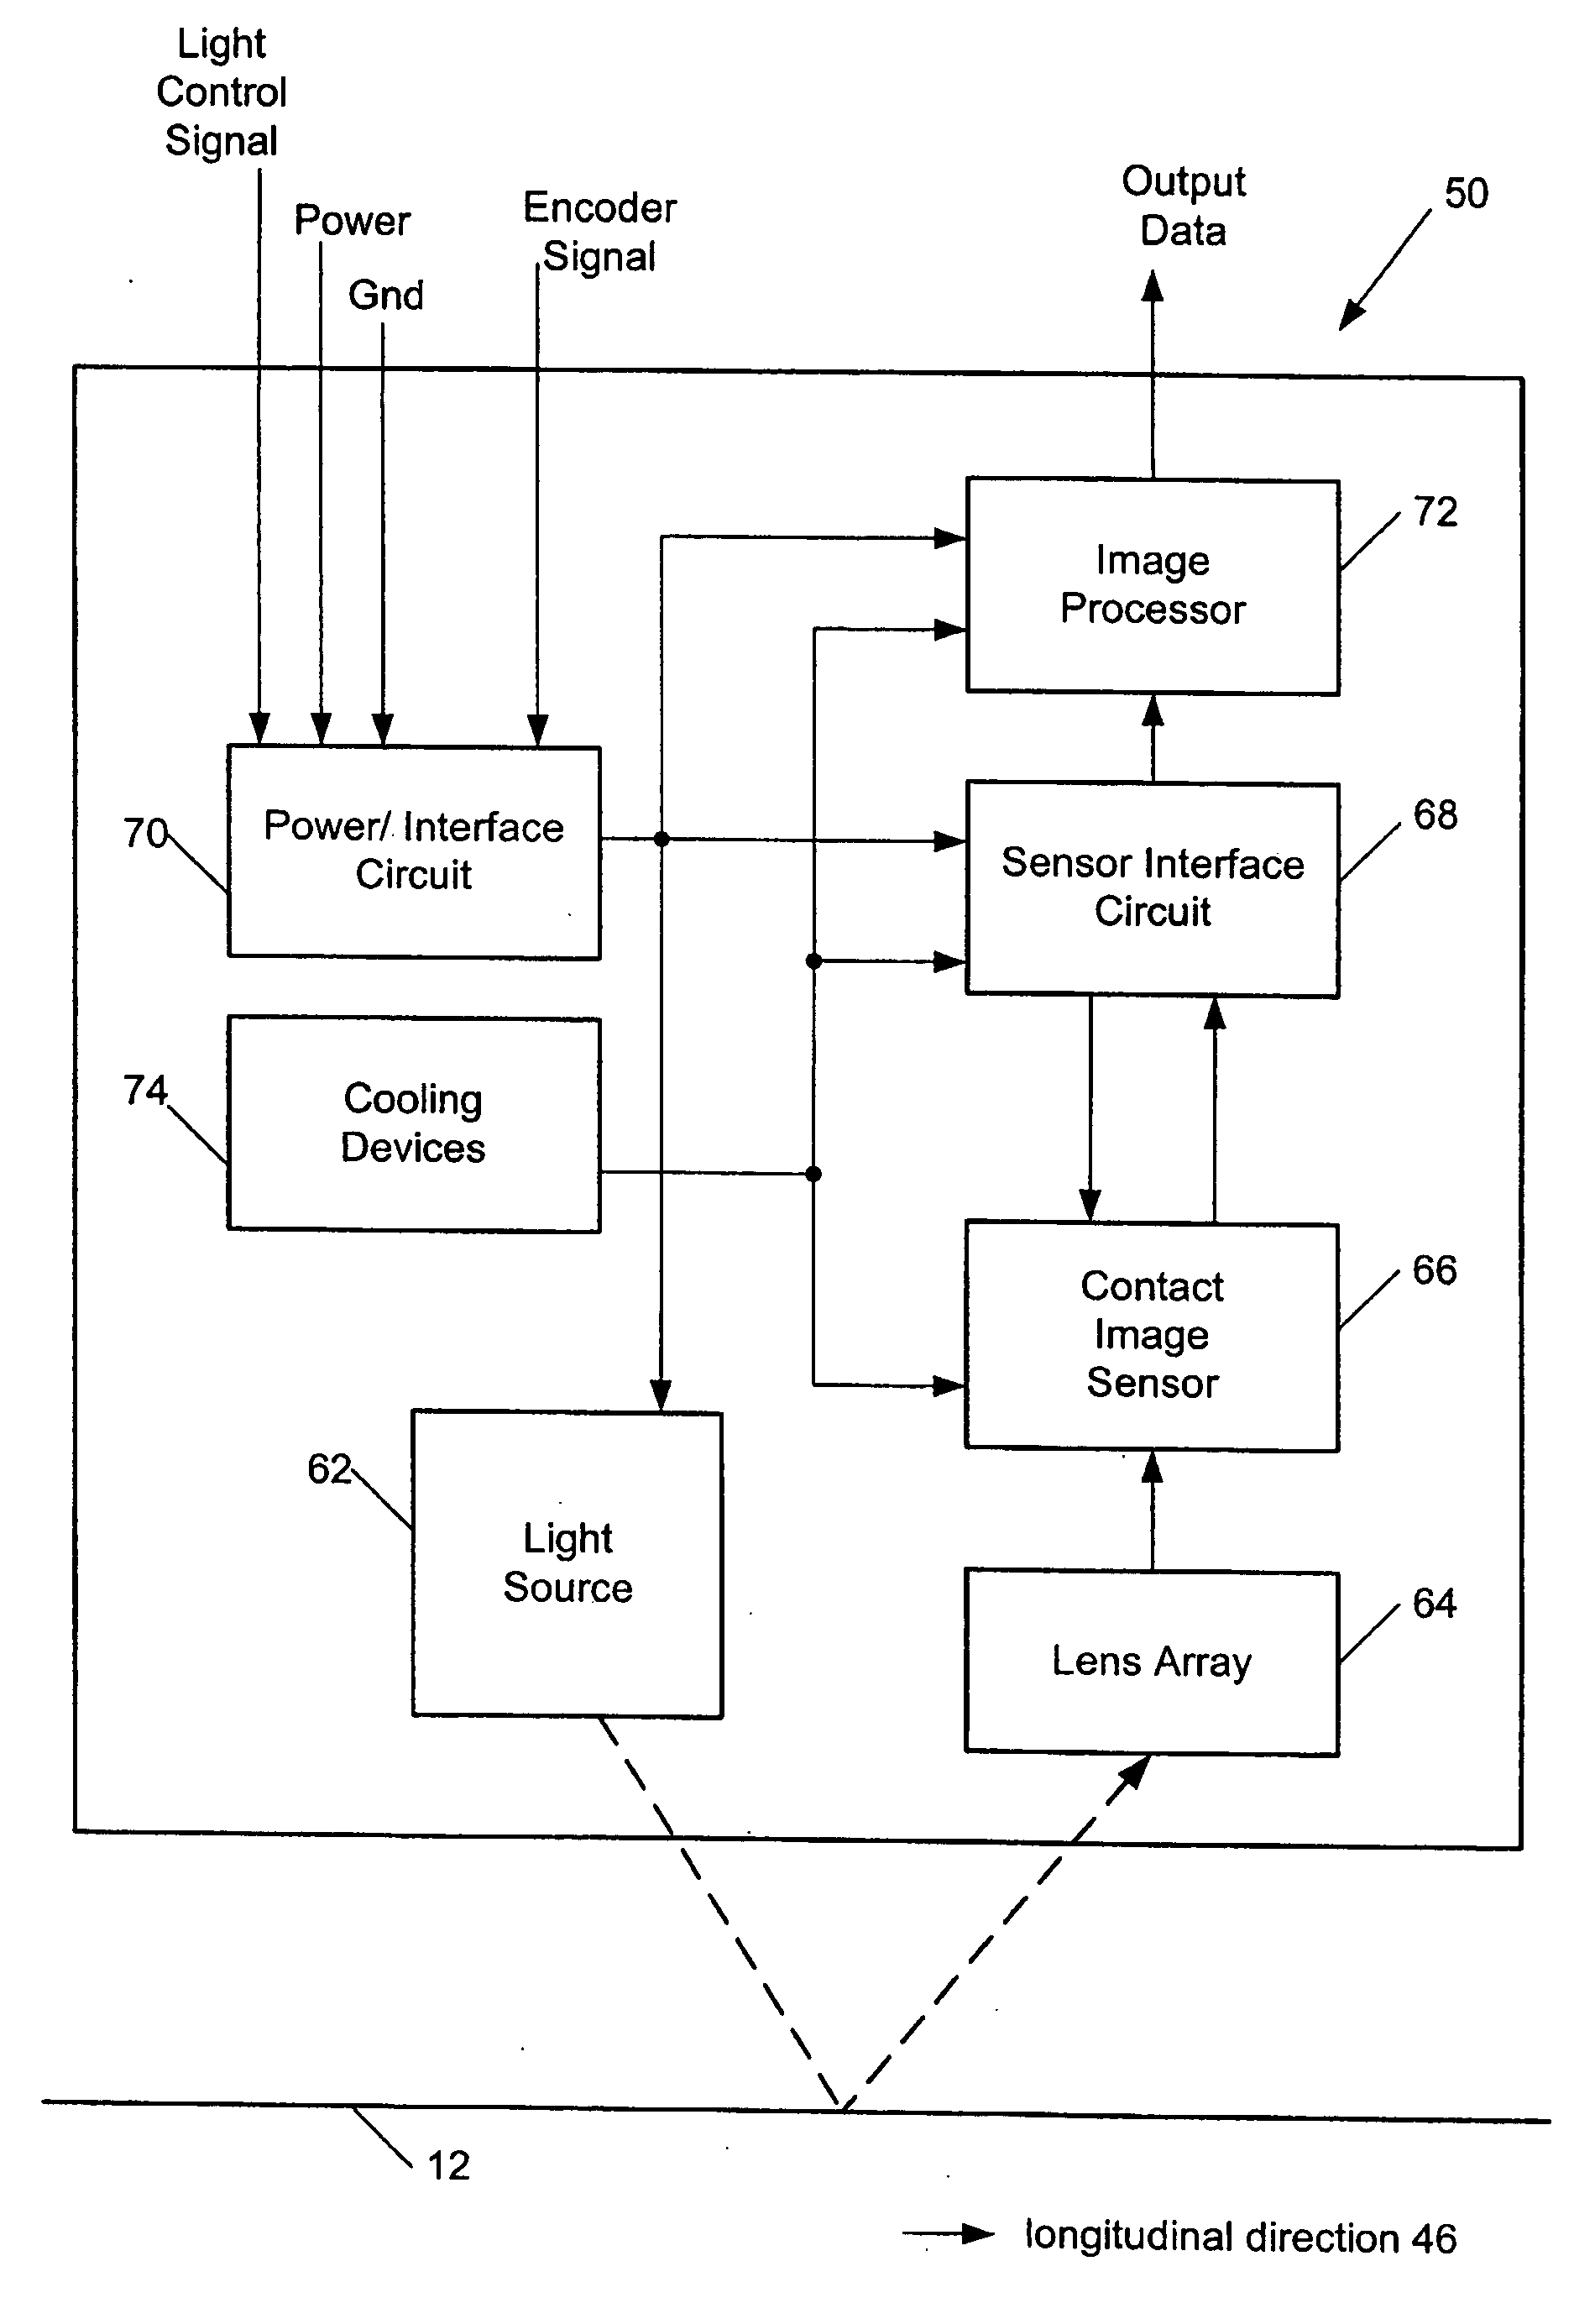 Web inspection module including contact image sensors